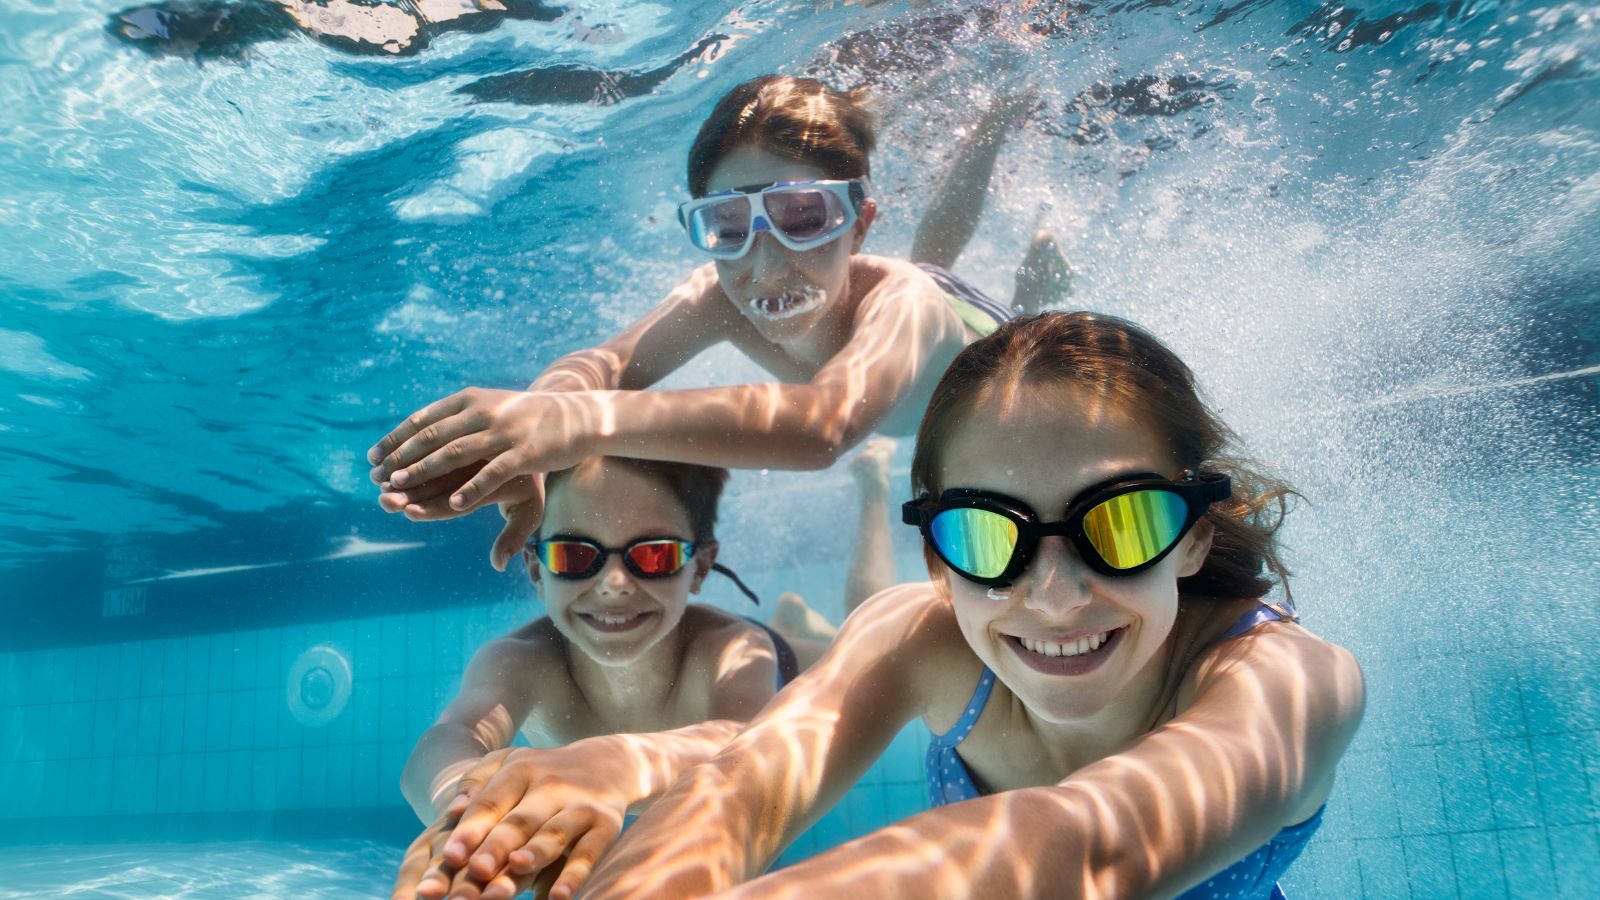 Smiling kids wearing goggles underwater in a swimming pool